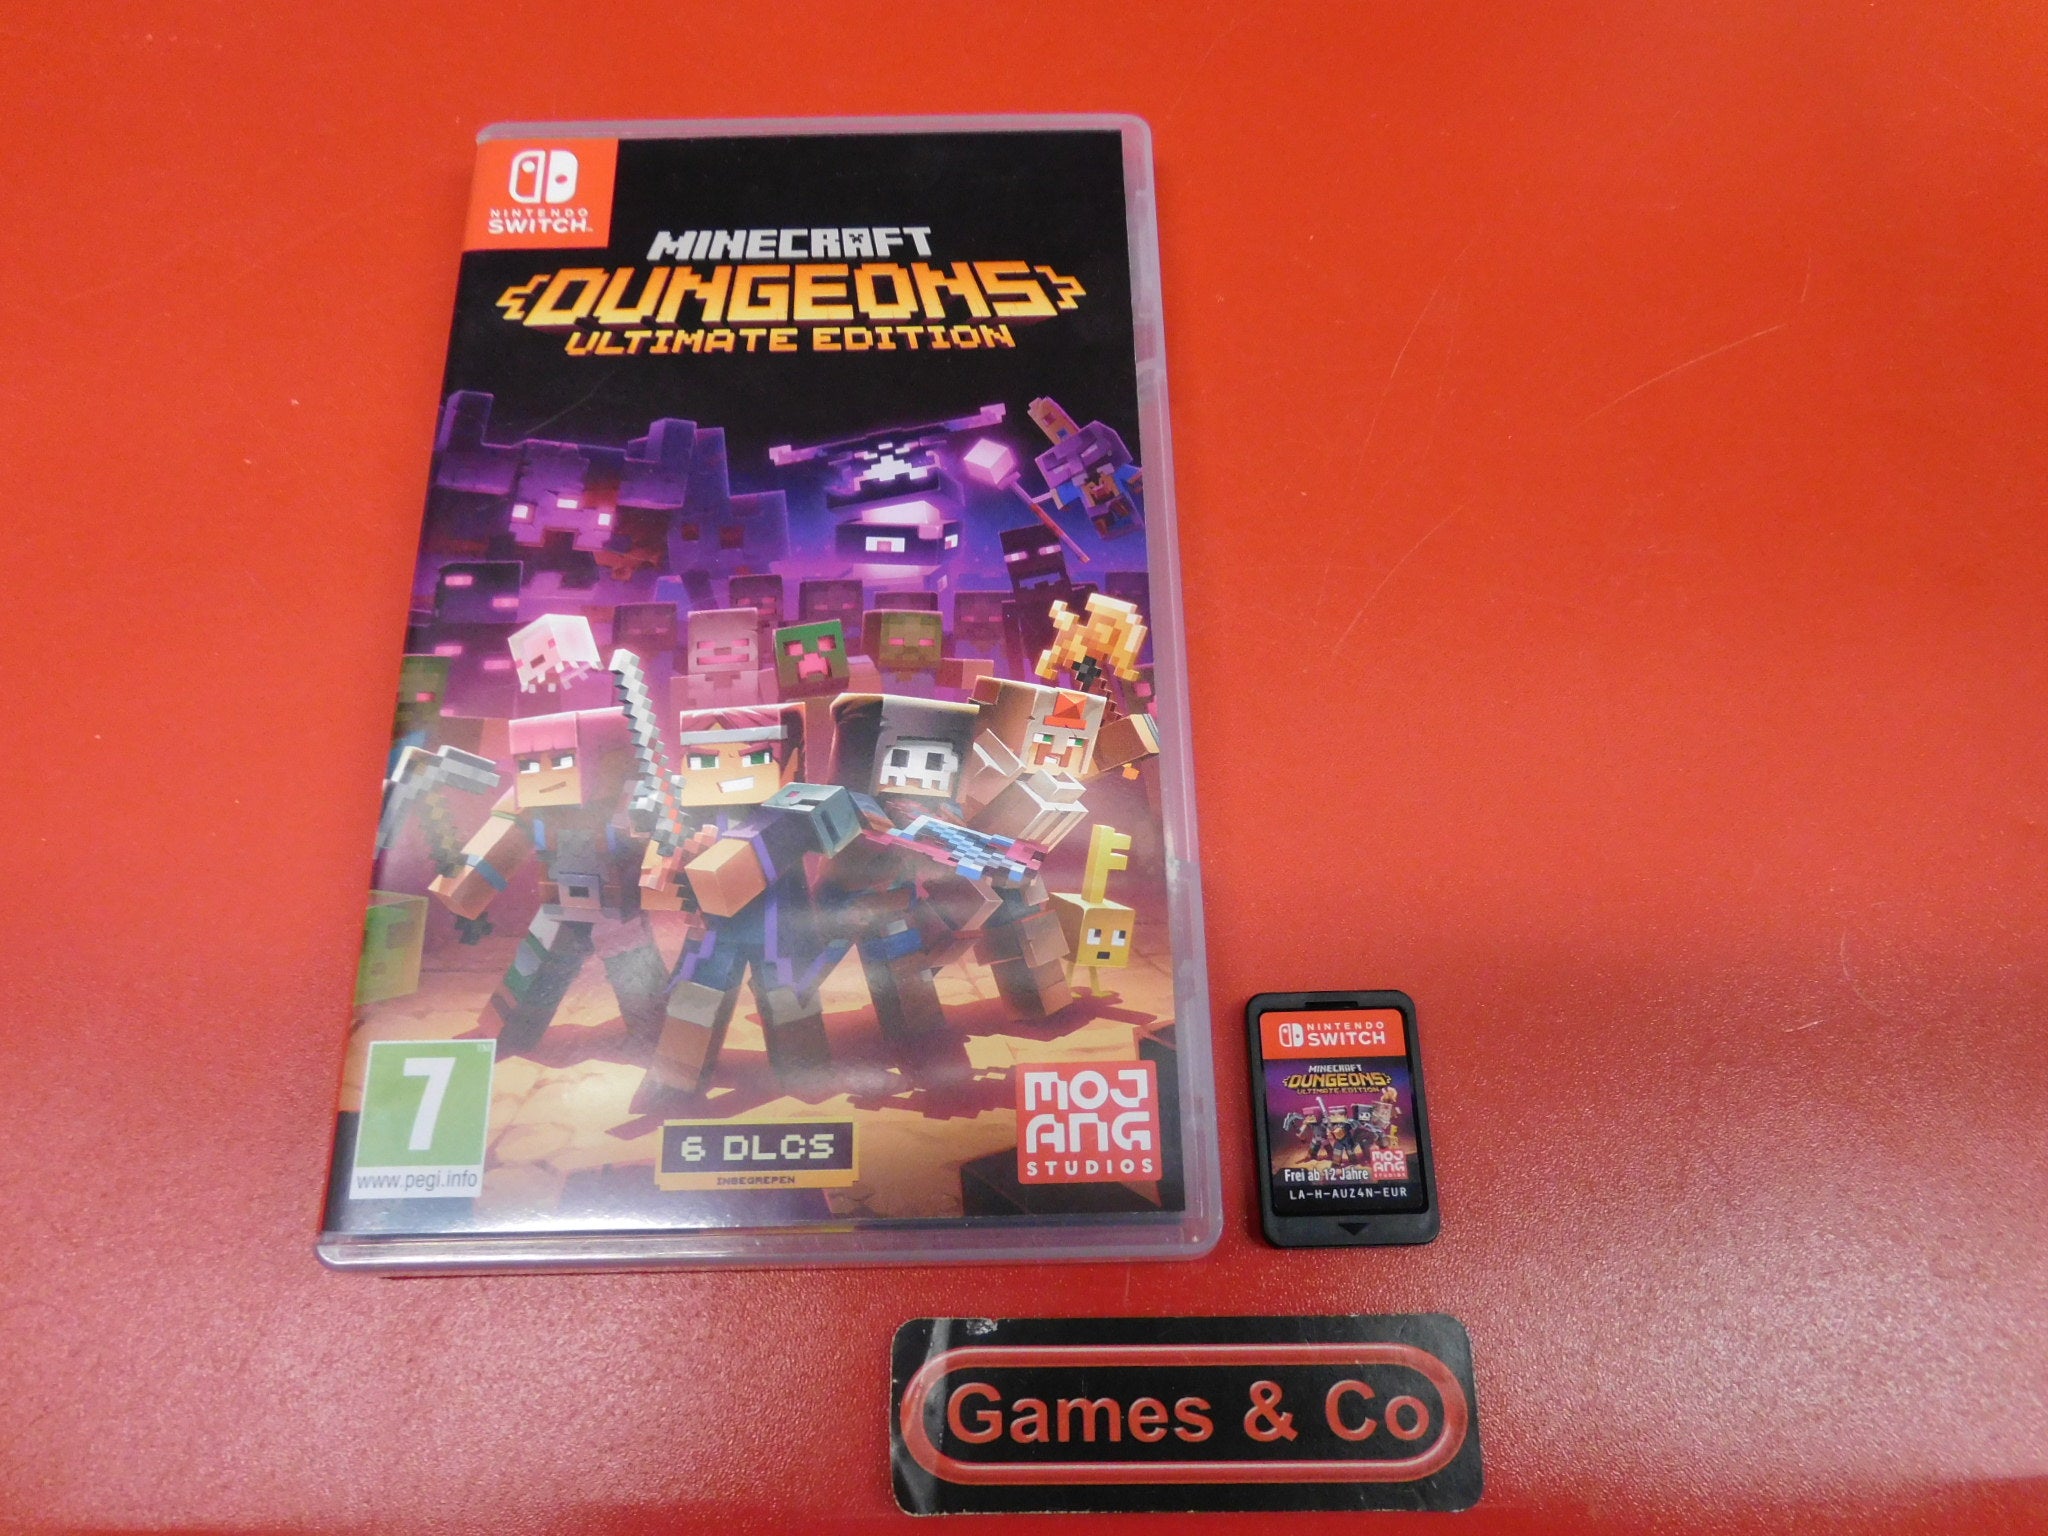 Minecraft Dungeons [ Ultimate Edition ] (Nintendo Switch) NEW